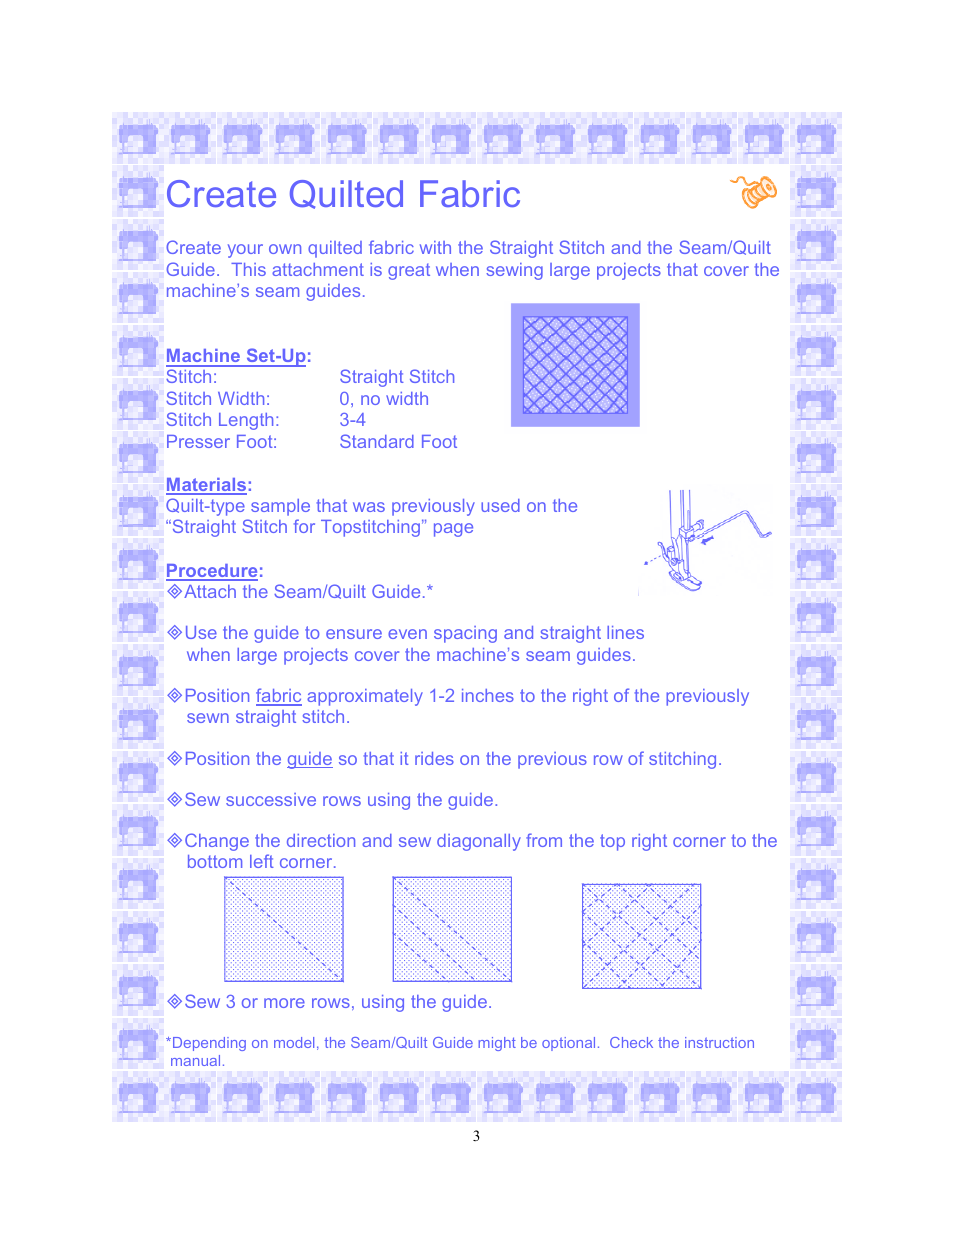 Create quilted fabric | SINGER 6550-WORKBOOK Scholastic User Manual | Page 7 / 59